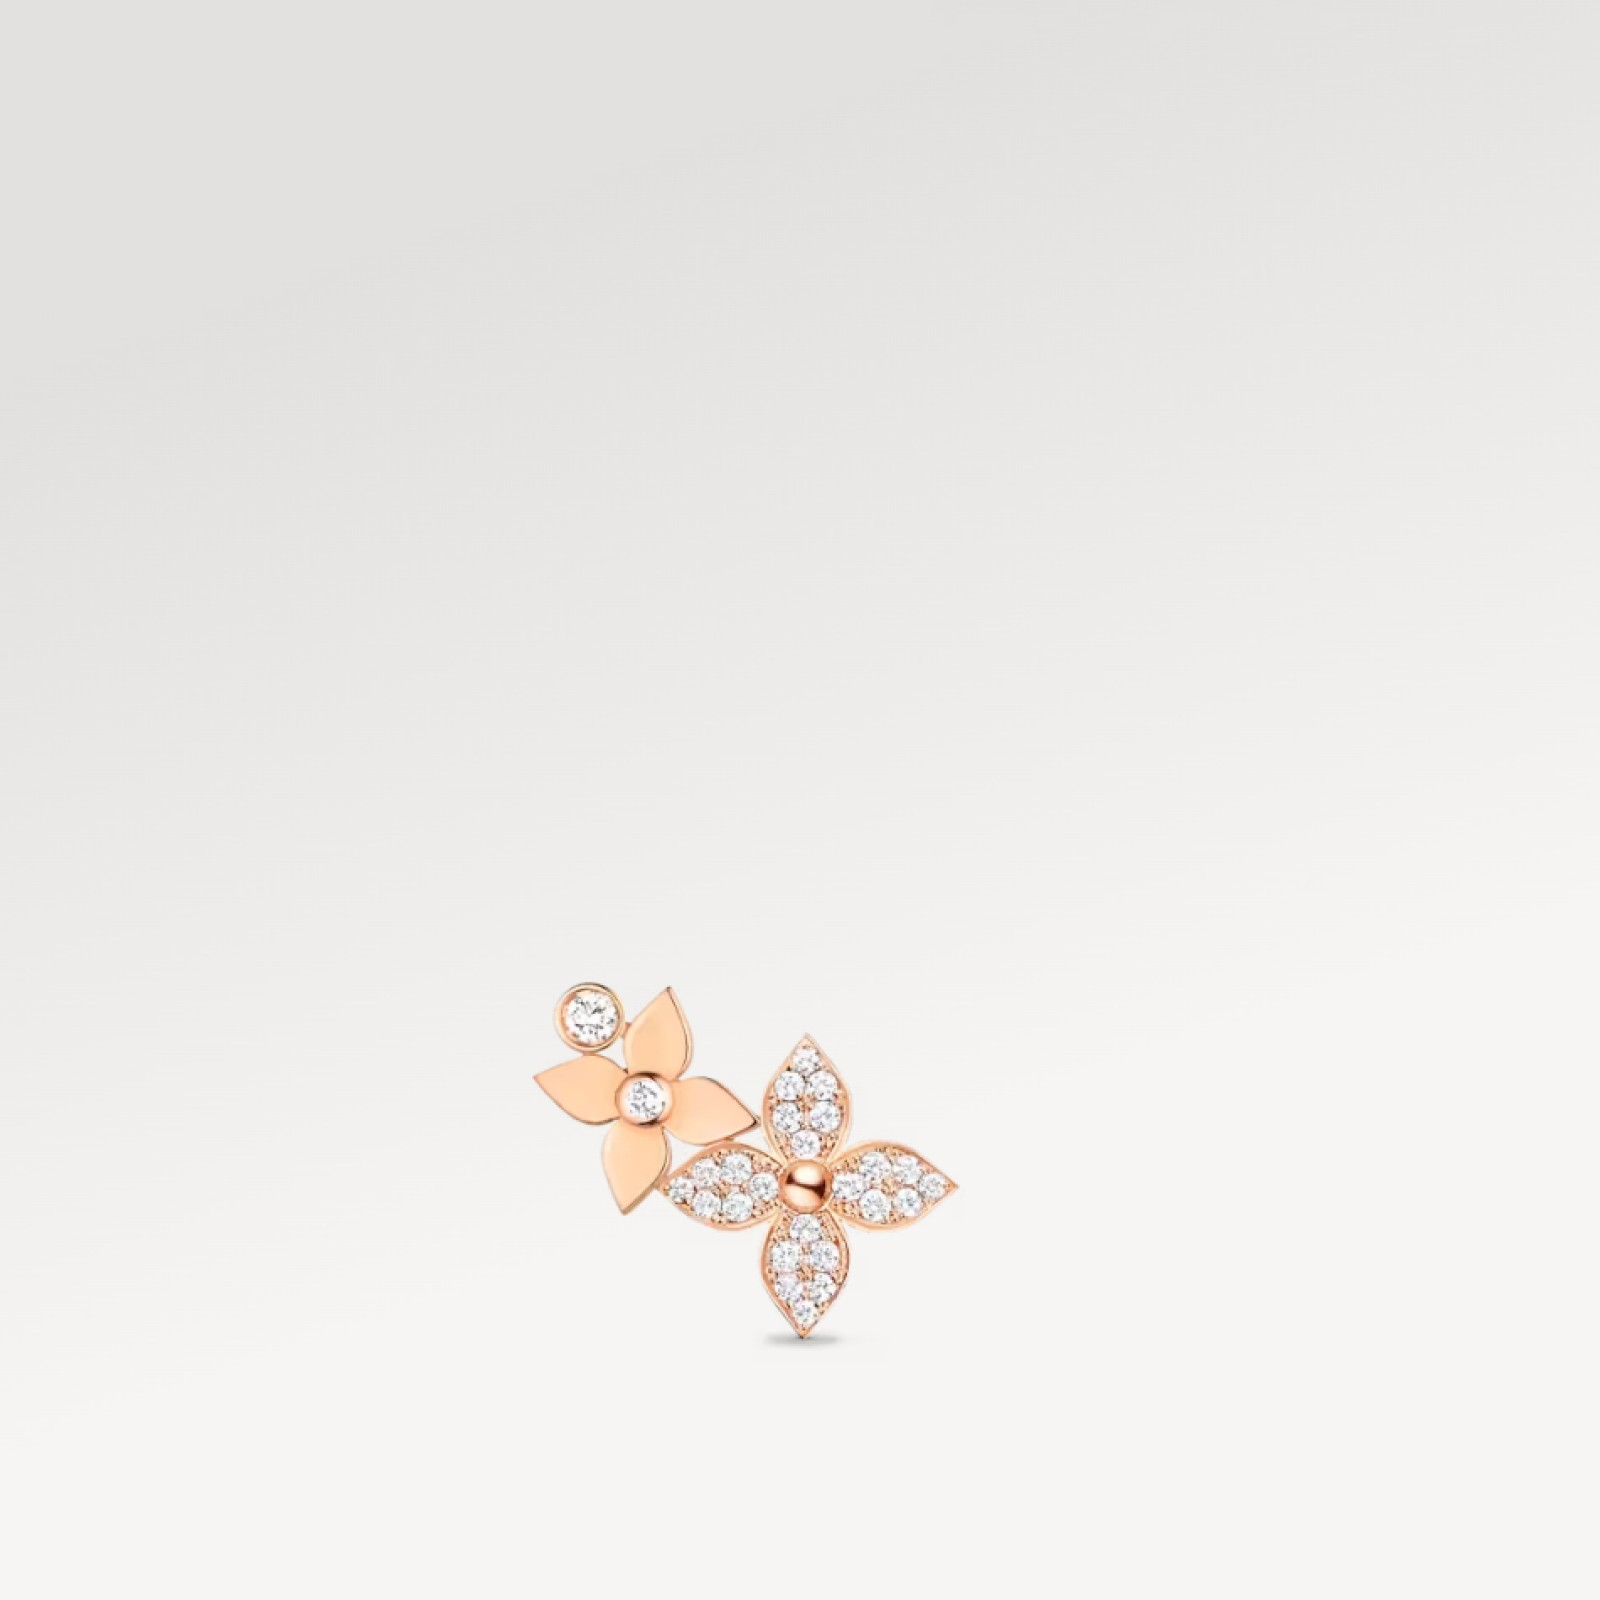 Idylle Blossom Left Earring, Pink Gold And Diamonds - Per Unit